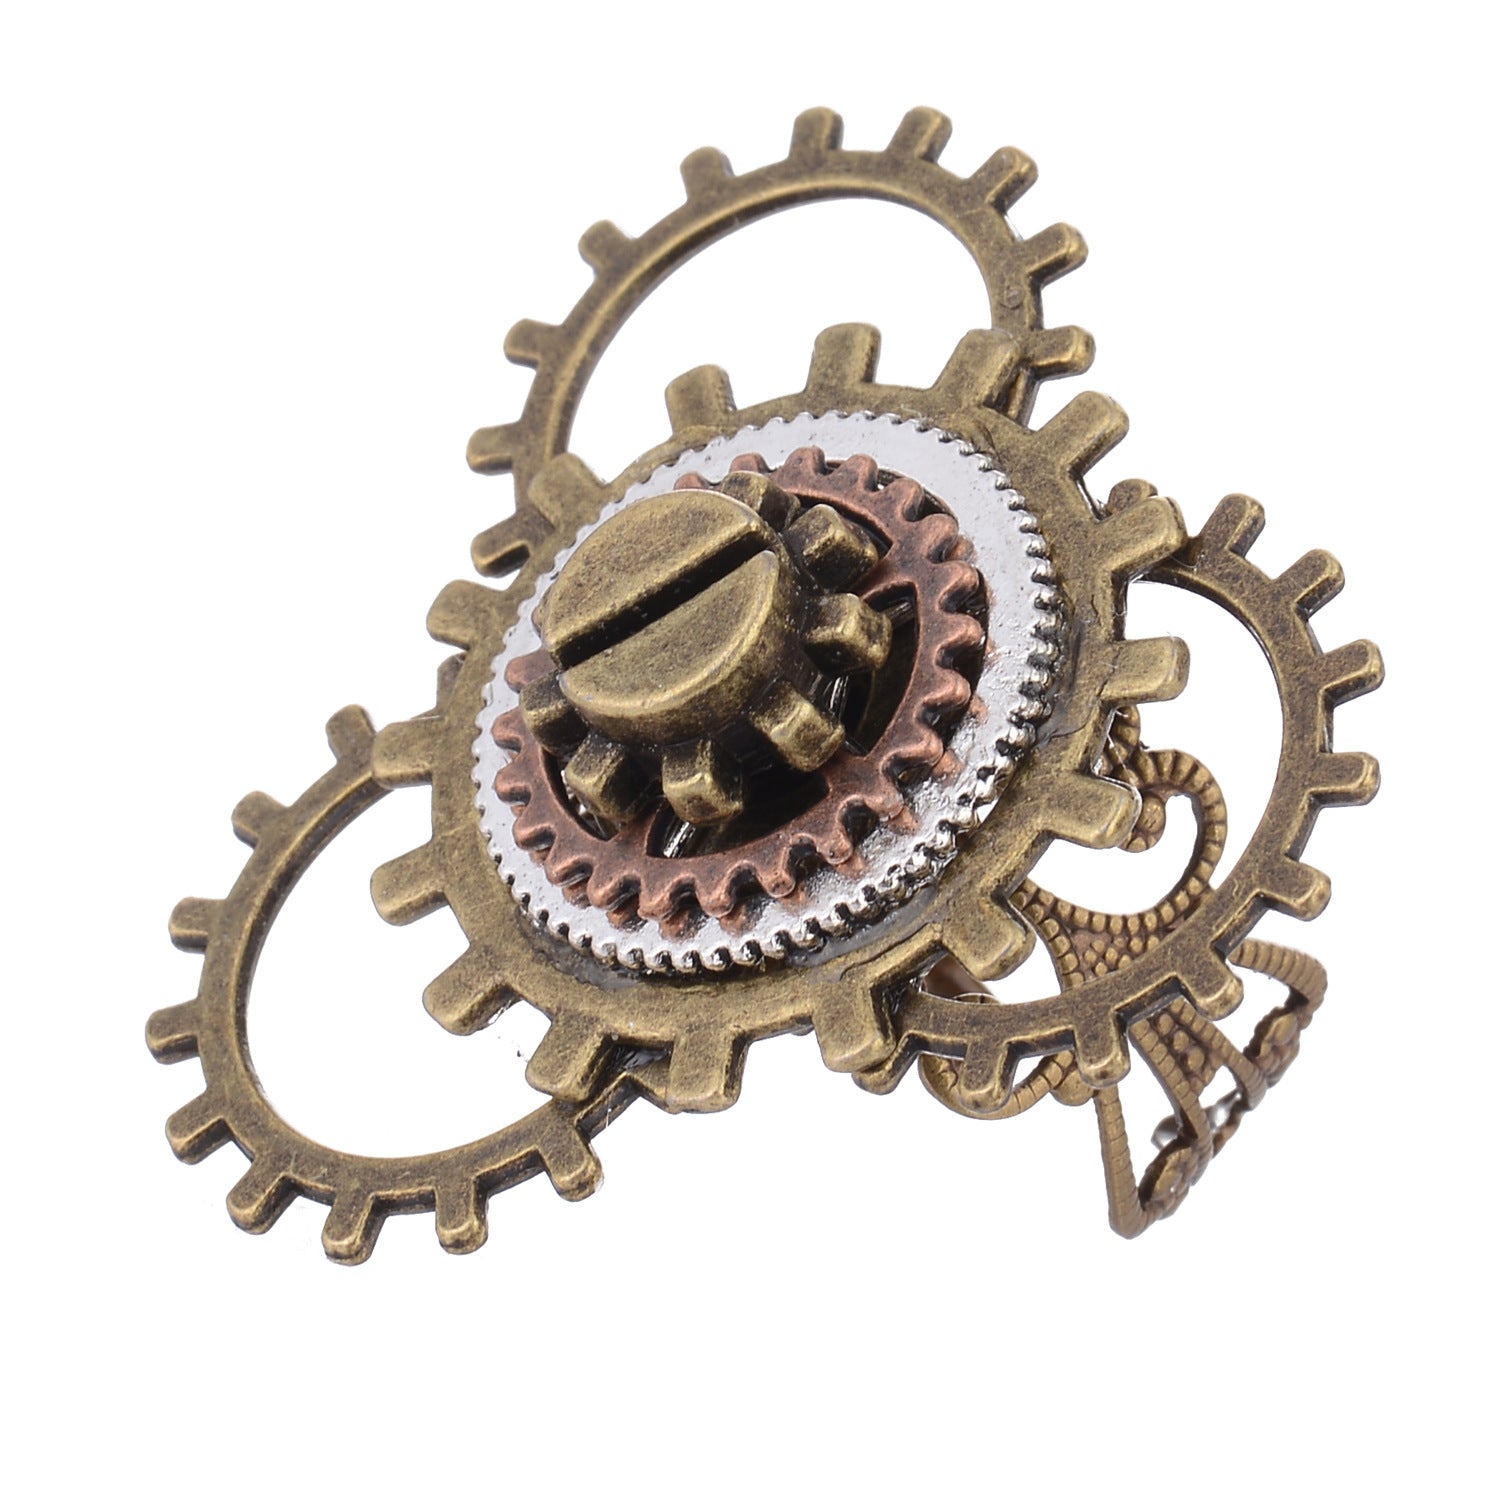 A woman's hand with a Maramalive™ Retro Steampunk 3 Ring Gear Ornament on it.